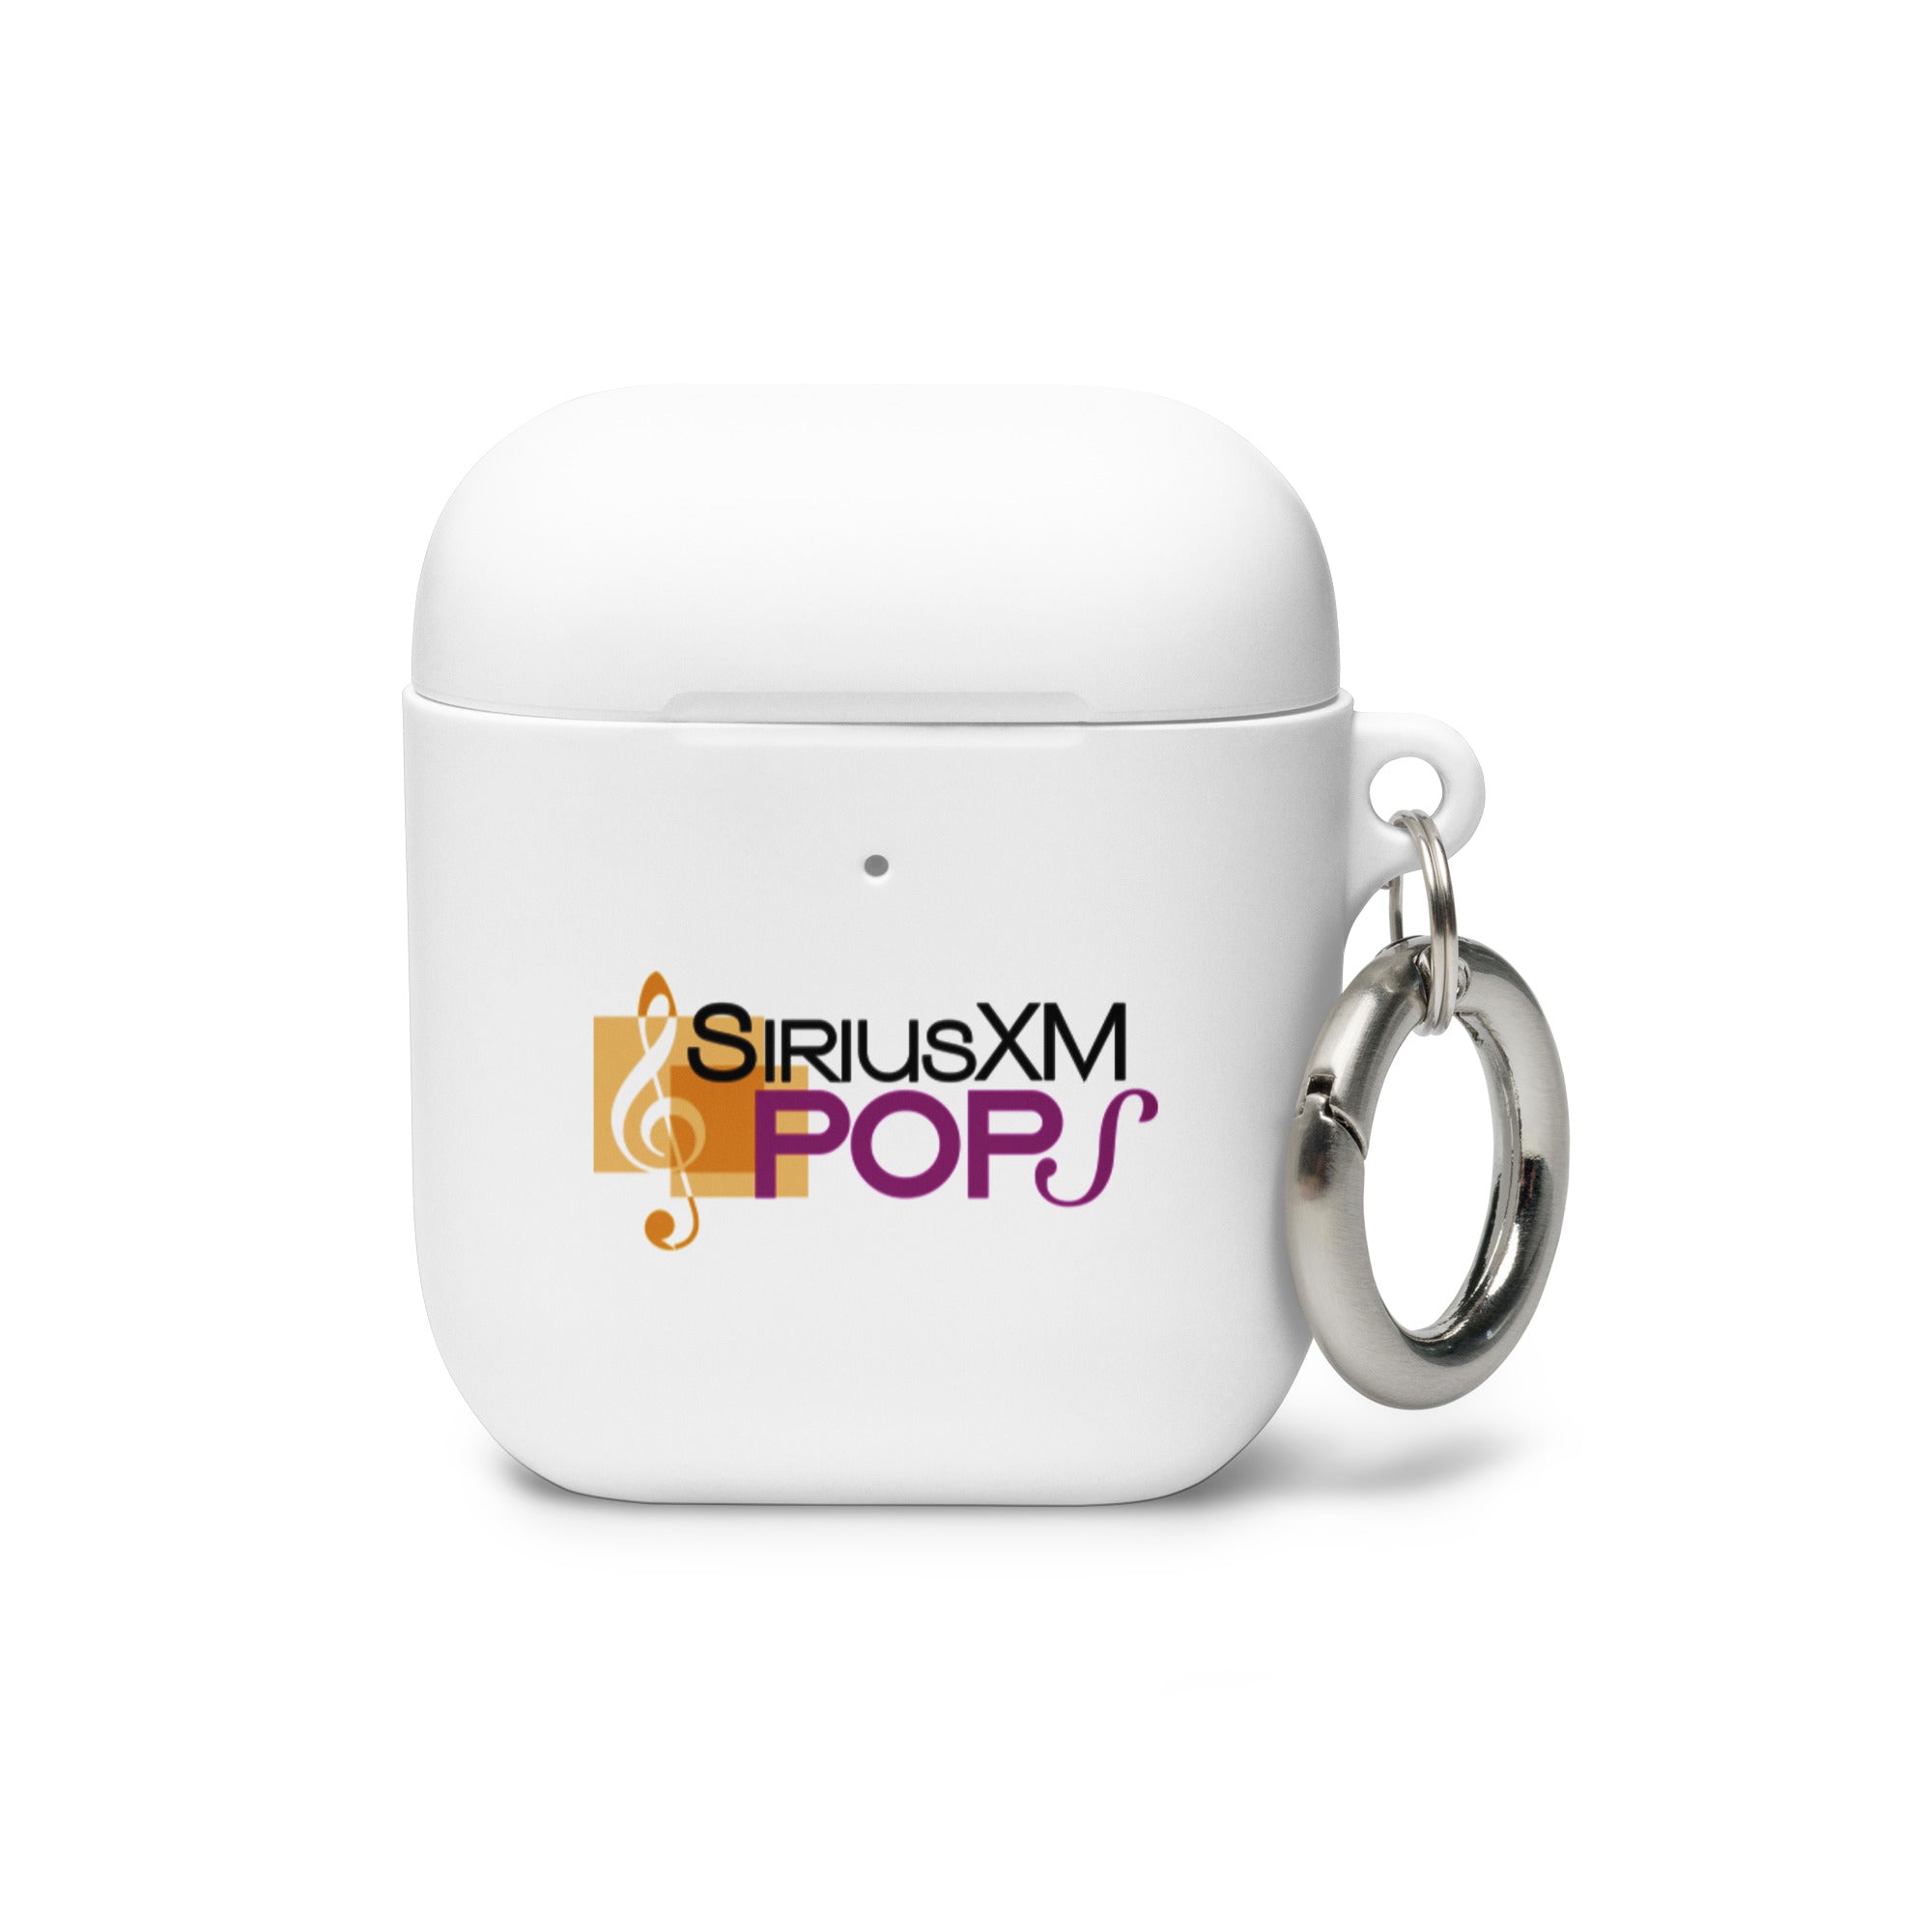 SiriusXM Pops: AirPods® Case Cover